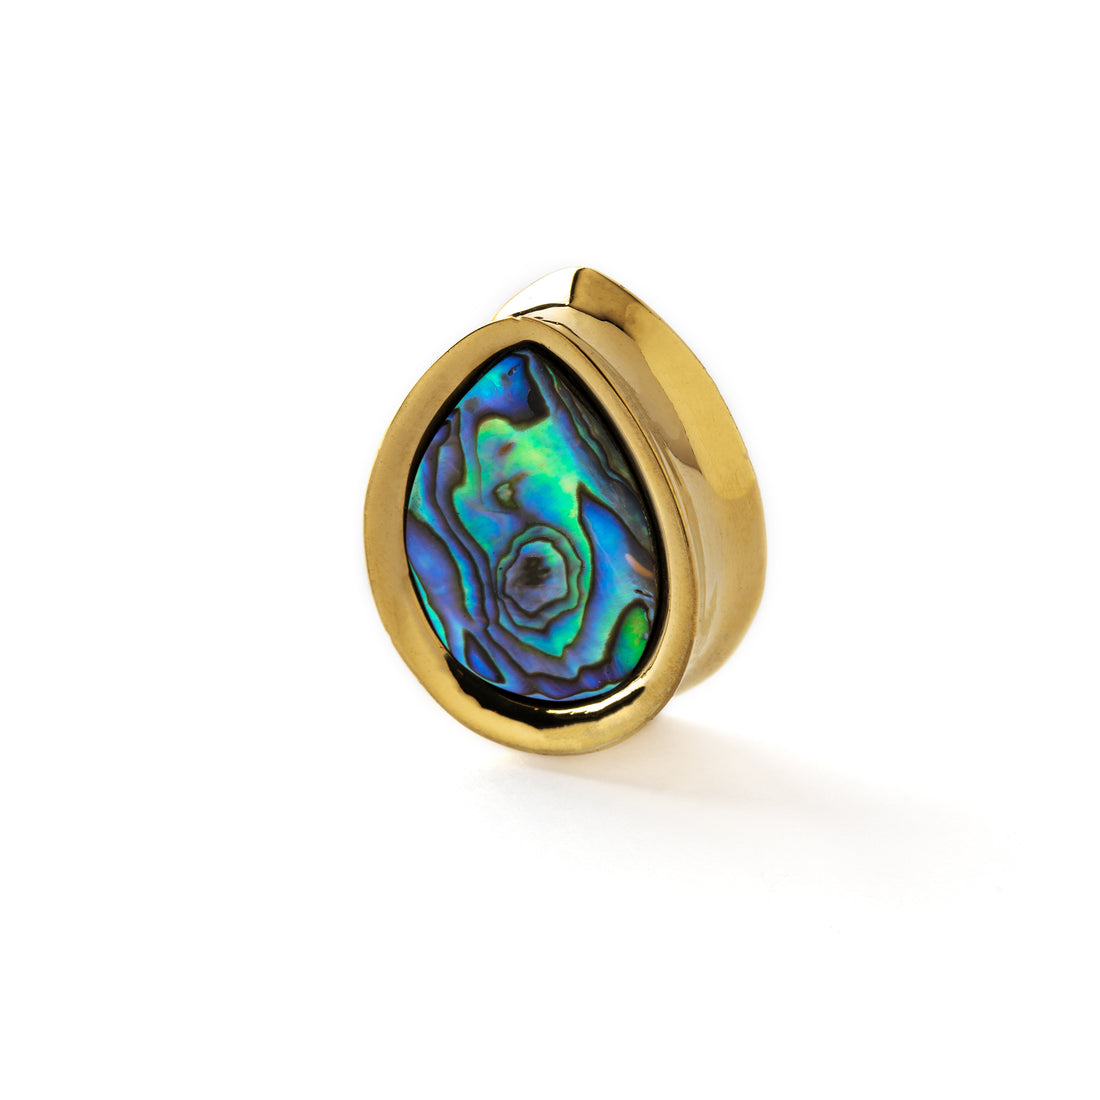 golden teardrop shaped plug earring with abalone shell inlay